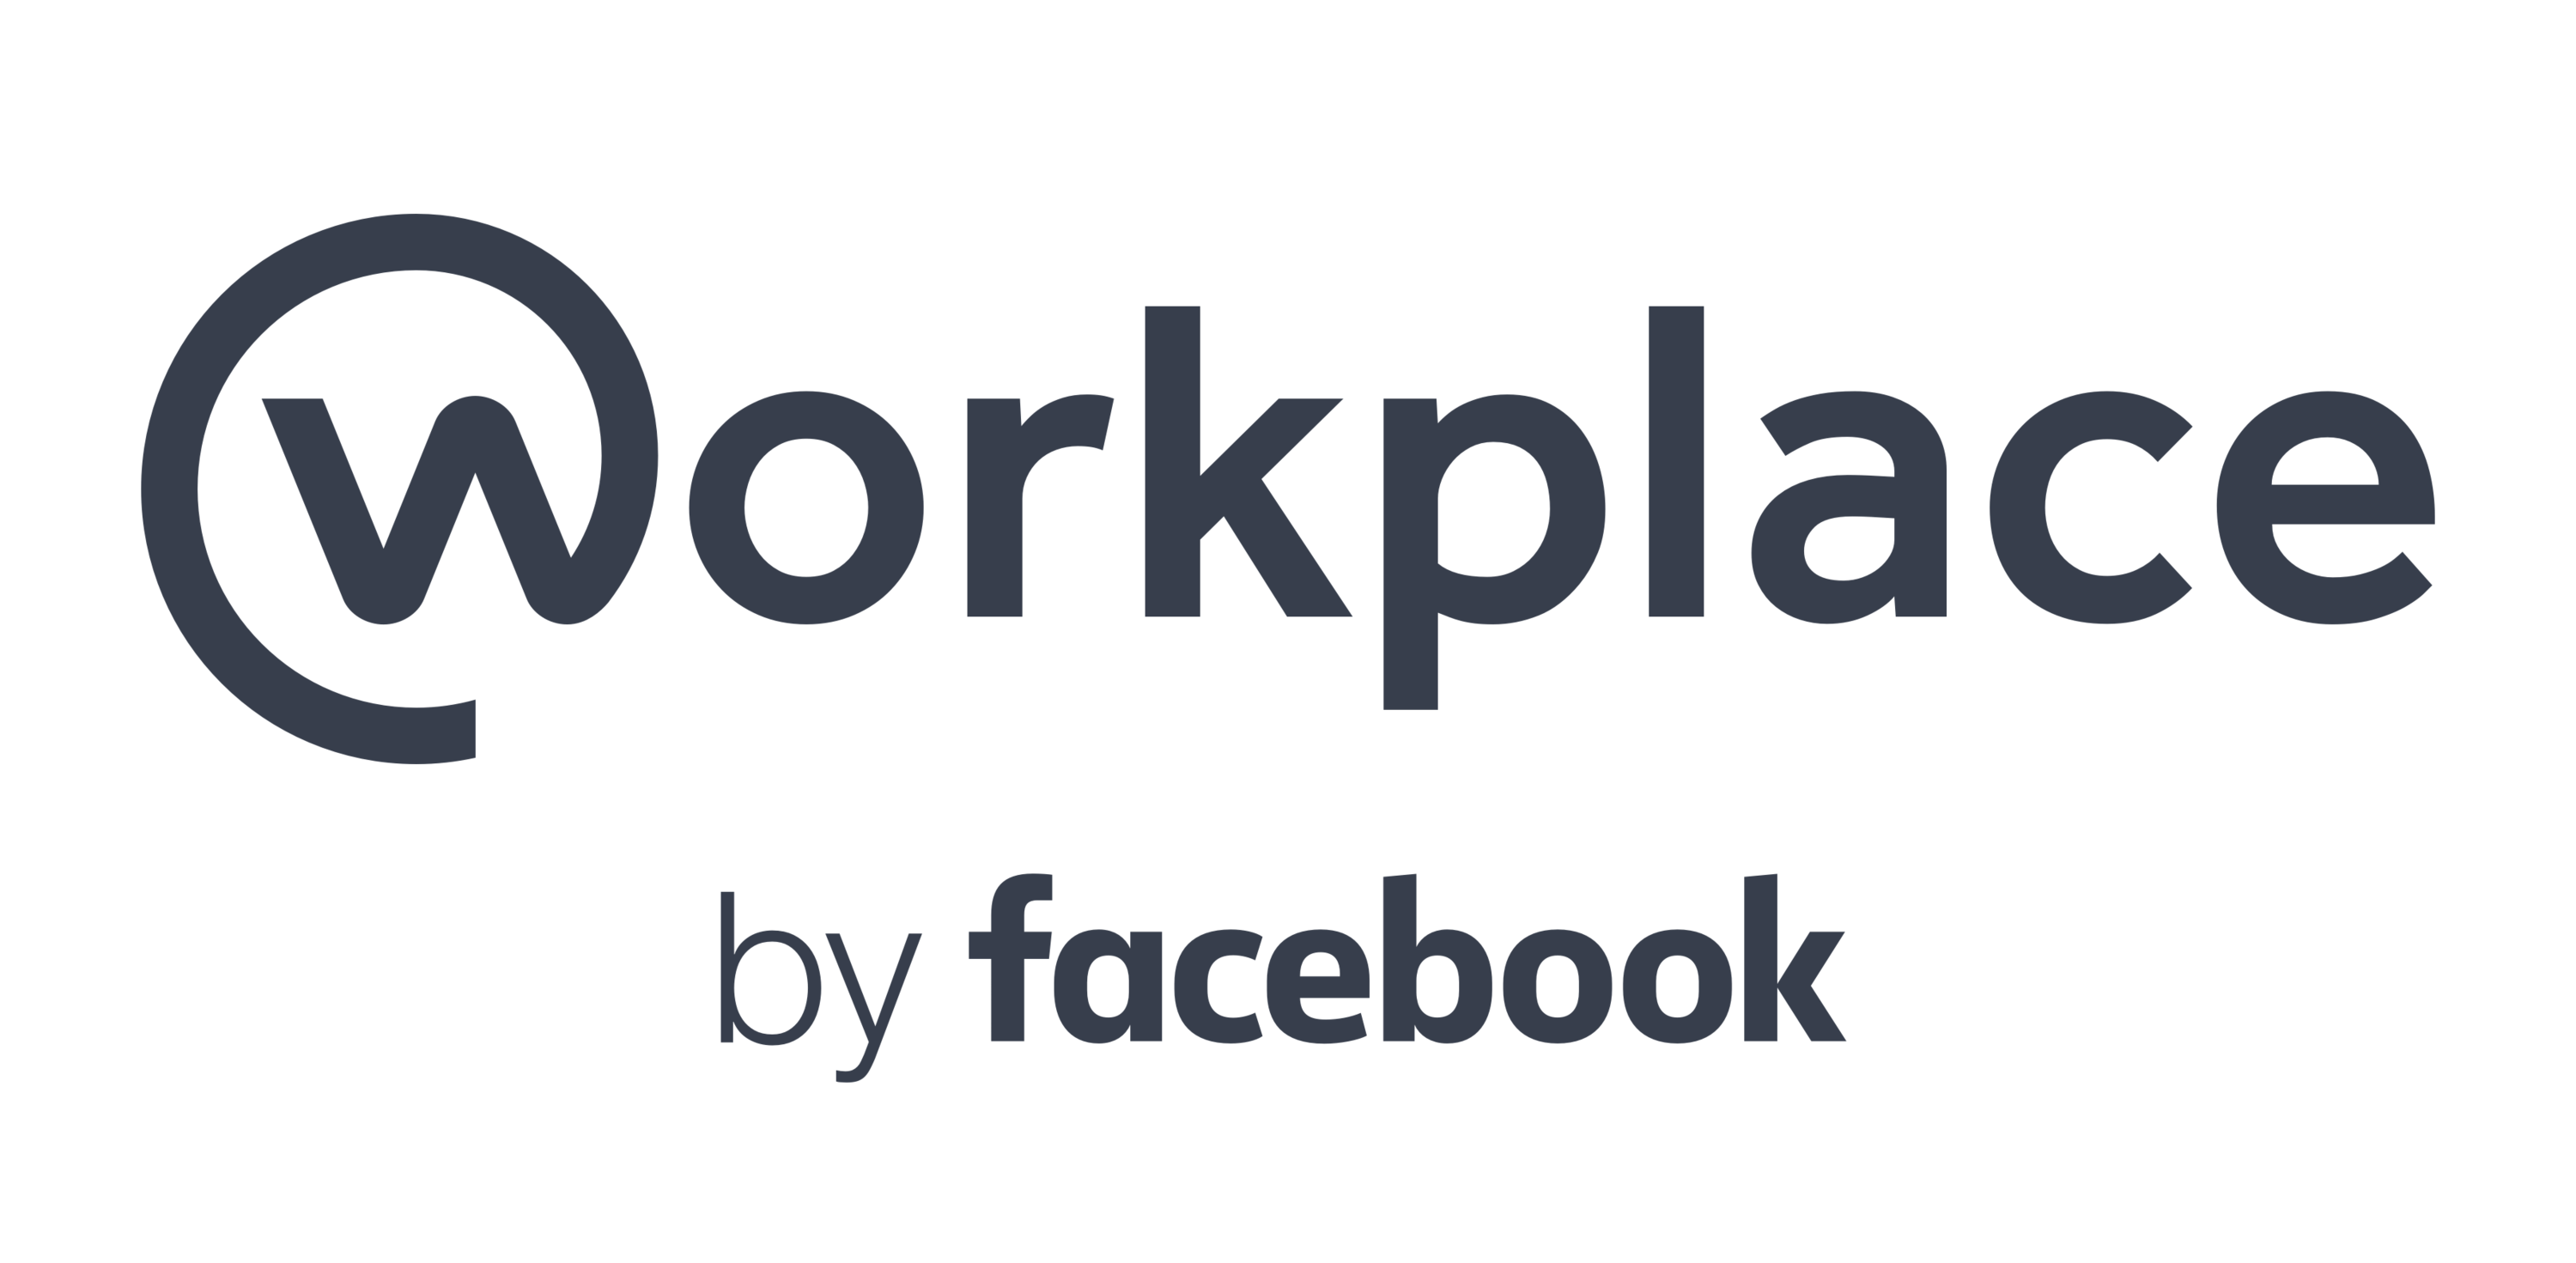 Workplace Logo - Download Product Brand Facebook Workplace Logo By HQ PNG Image in ...